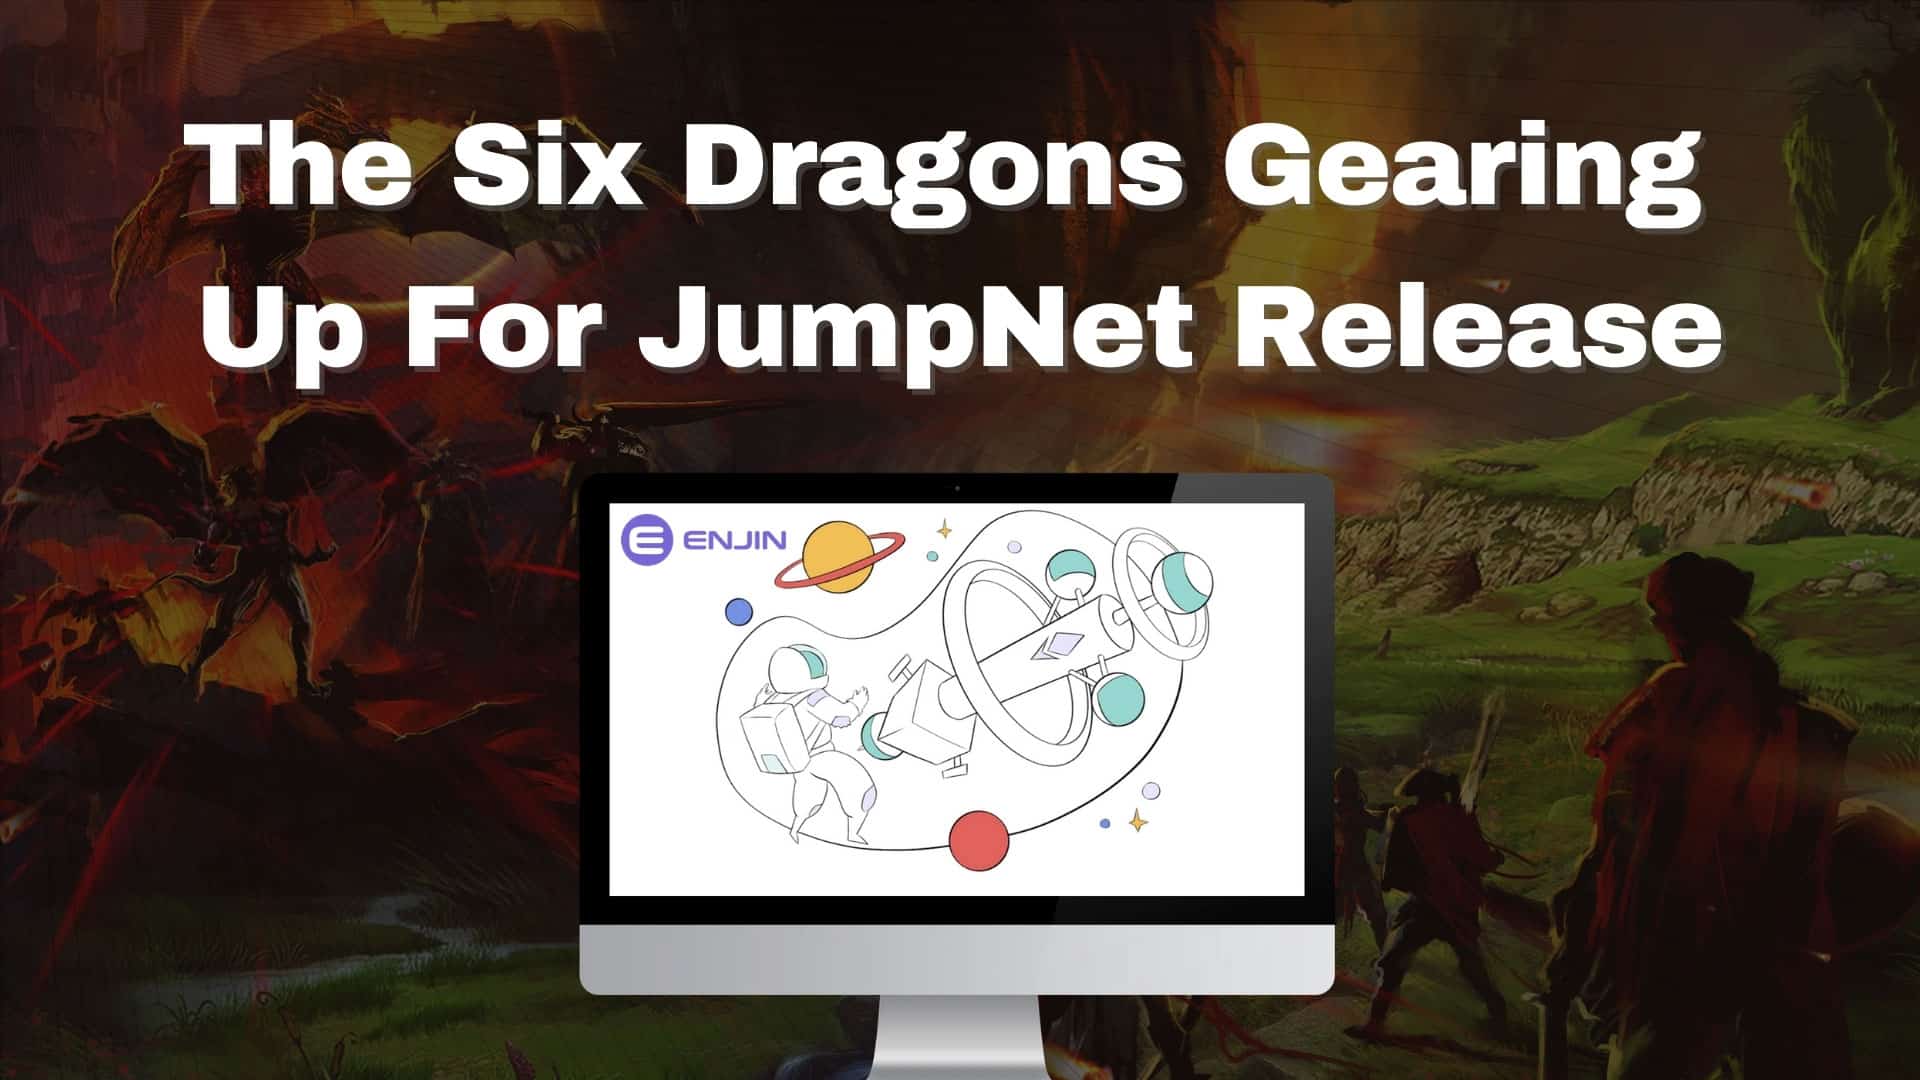 The Six Dragons gearing up for jumpnet release